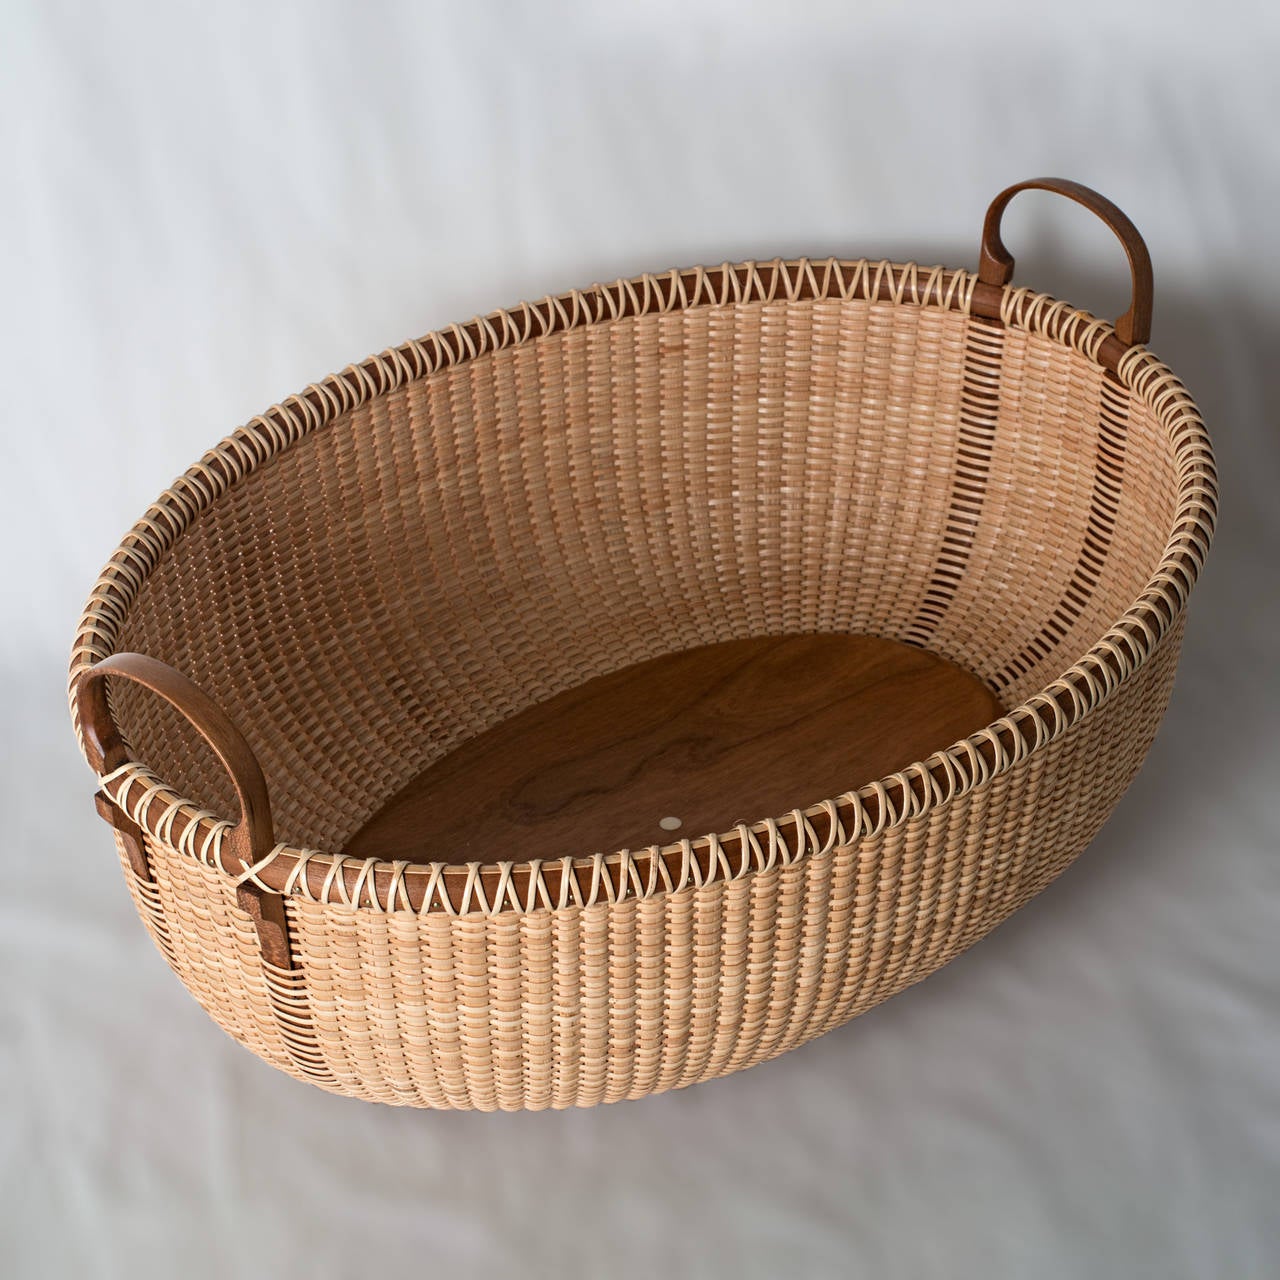 Nantucket basket serving tray by Lucille LaRochelle with carved cherry side handles highlighted by matching cherry staves, cherry rim and base, and rattan woven body